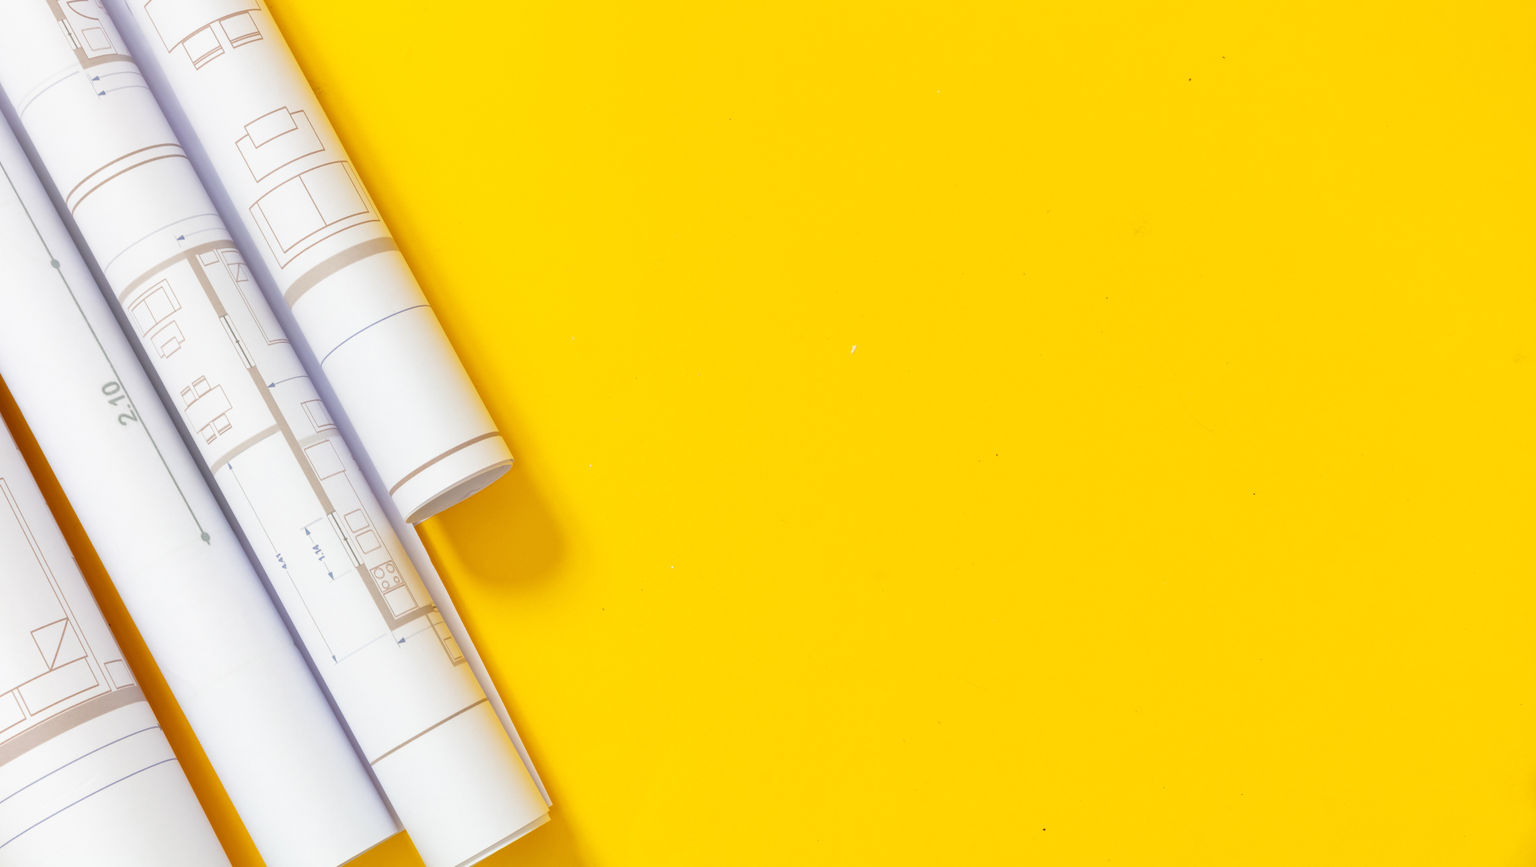 Three large site surveys rolled up on white paper on a yellow background.